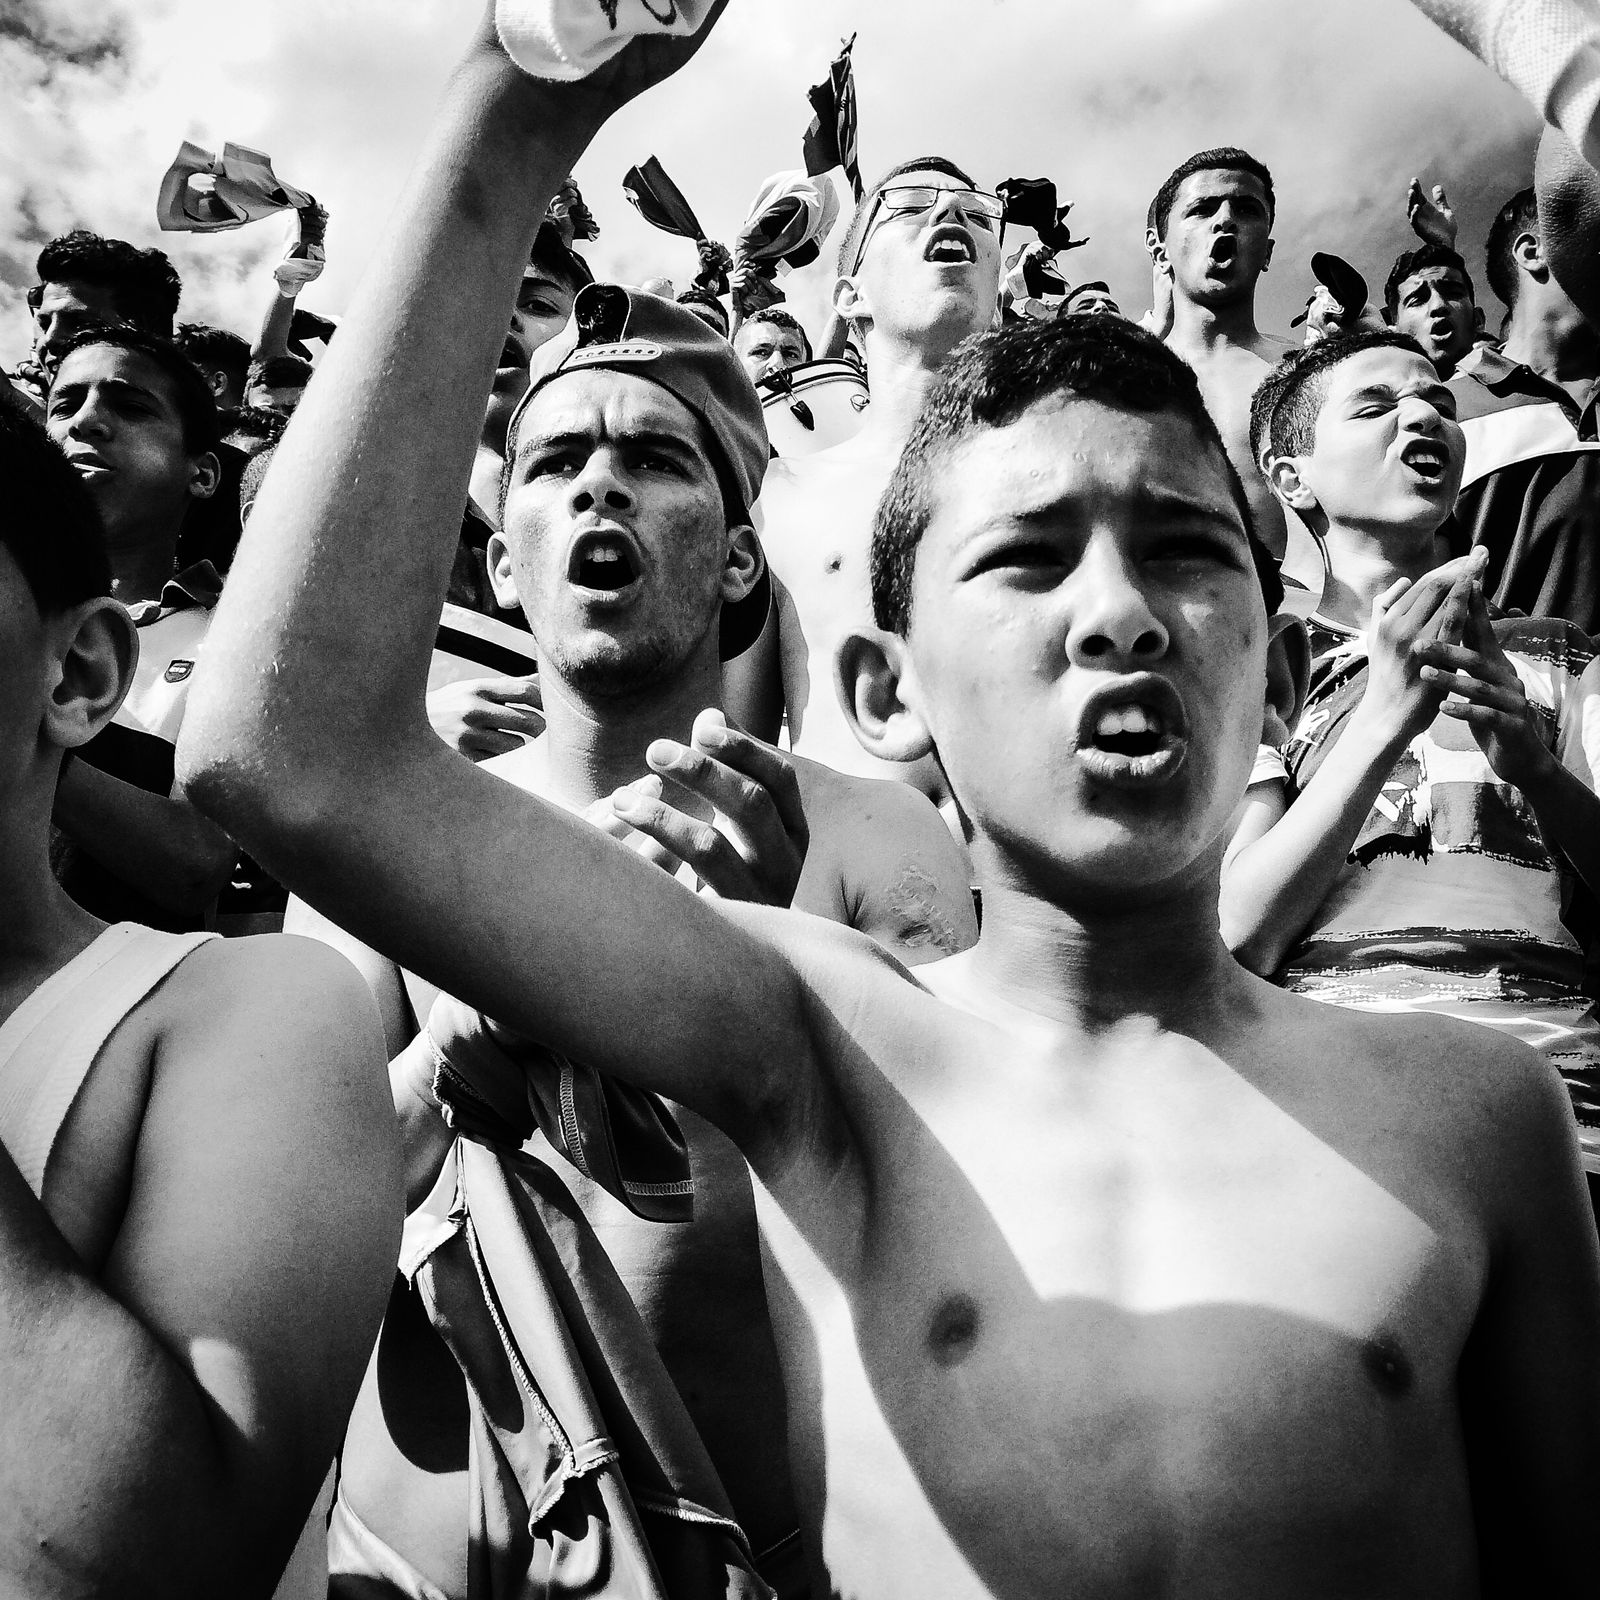 © Fethi Sahraoui - Young supporter reacting to an action during a match.